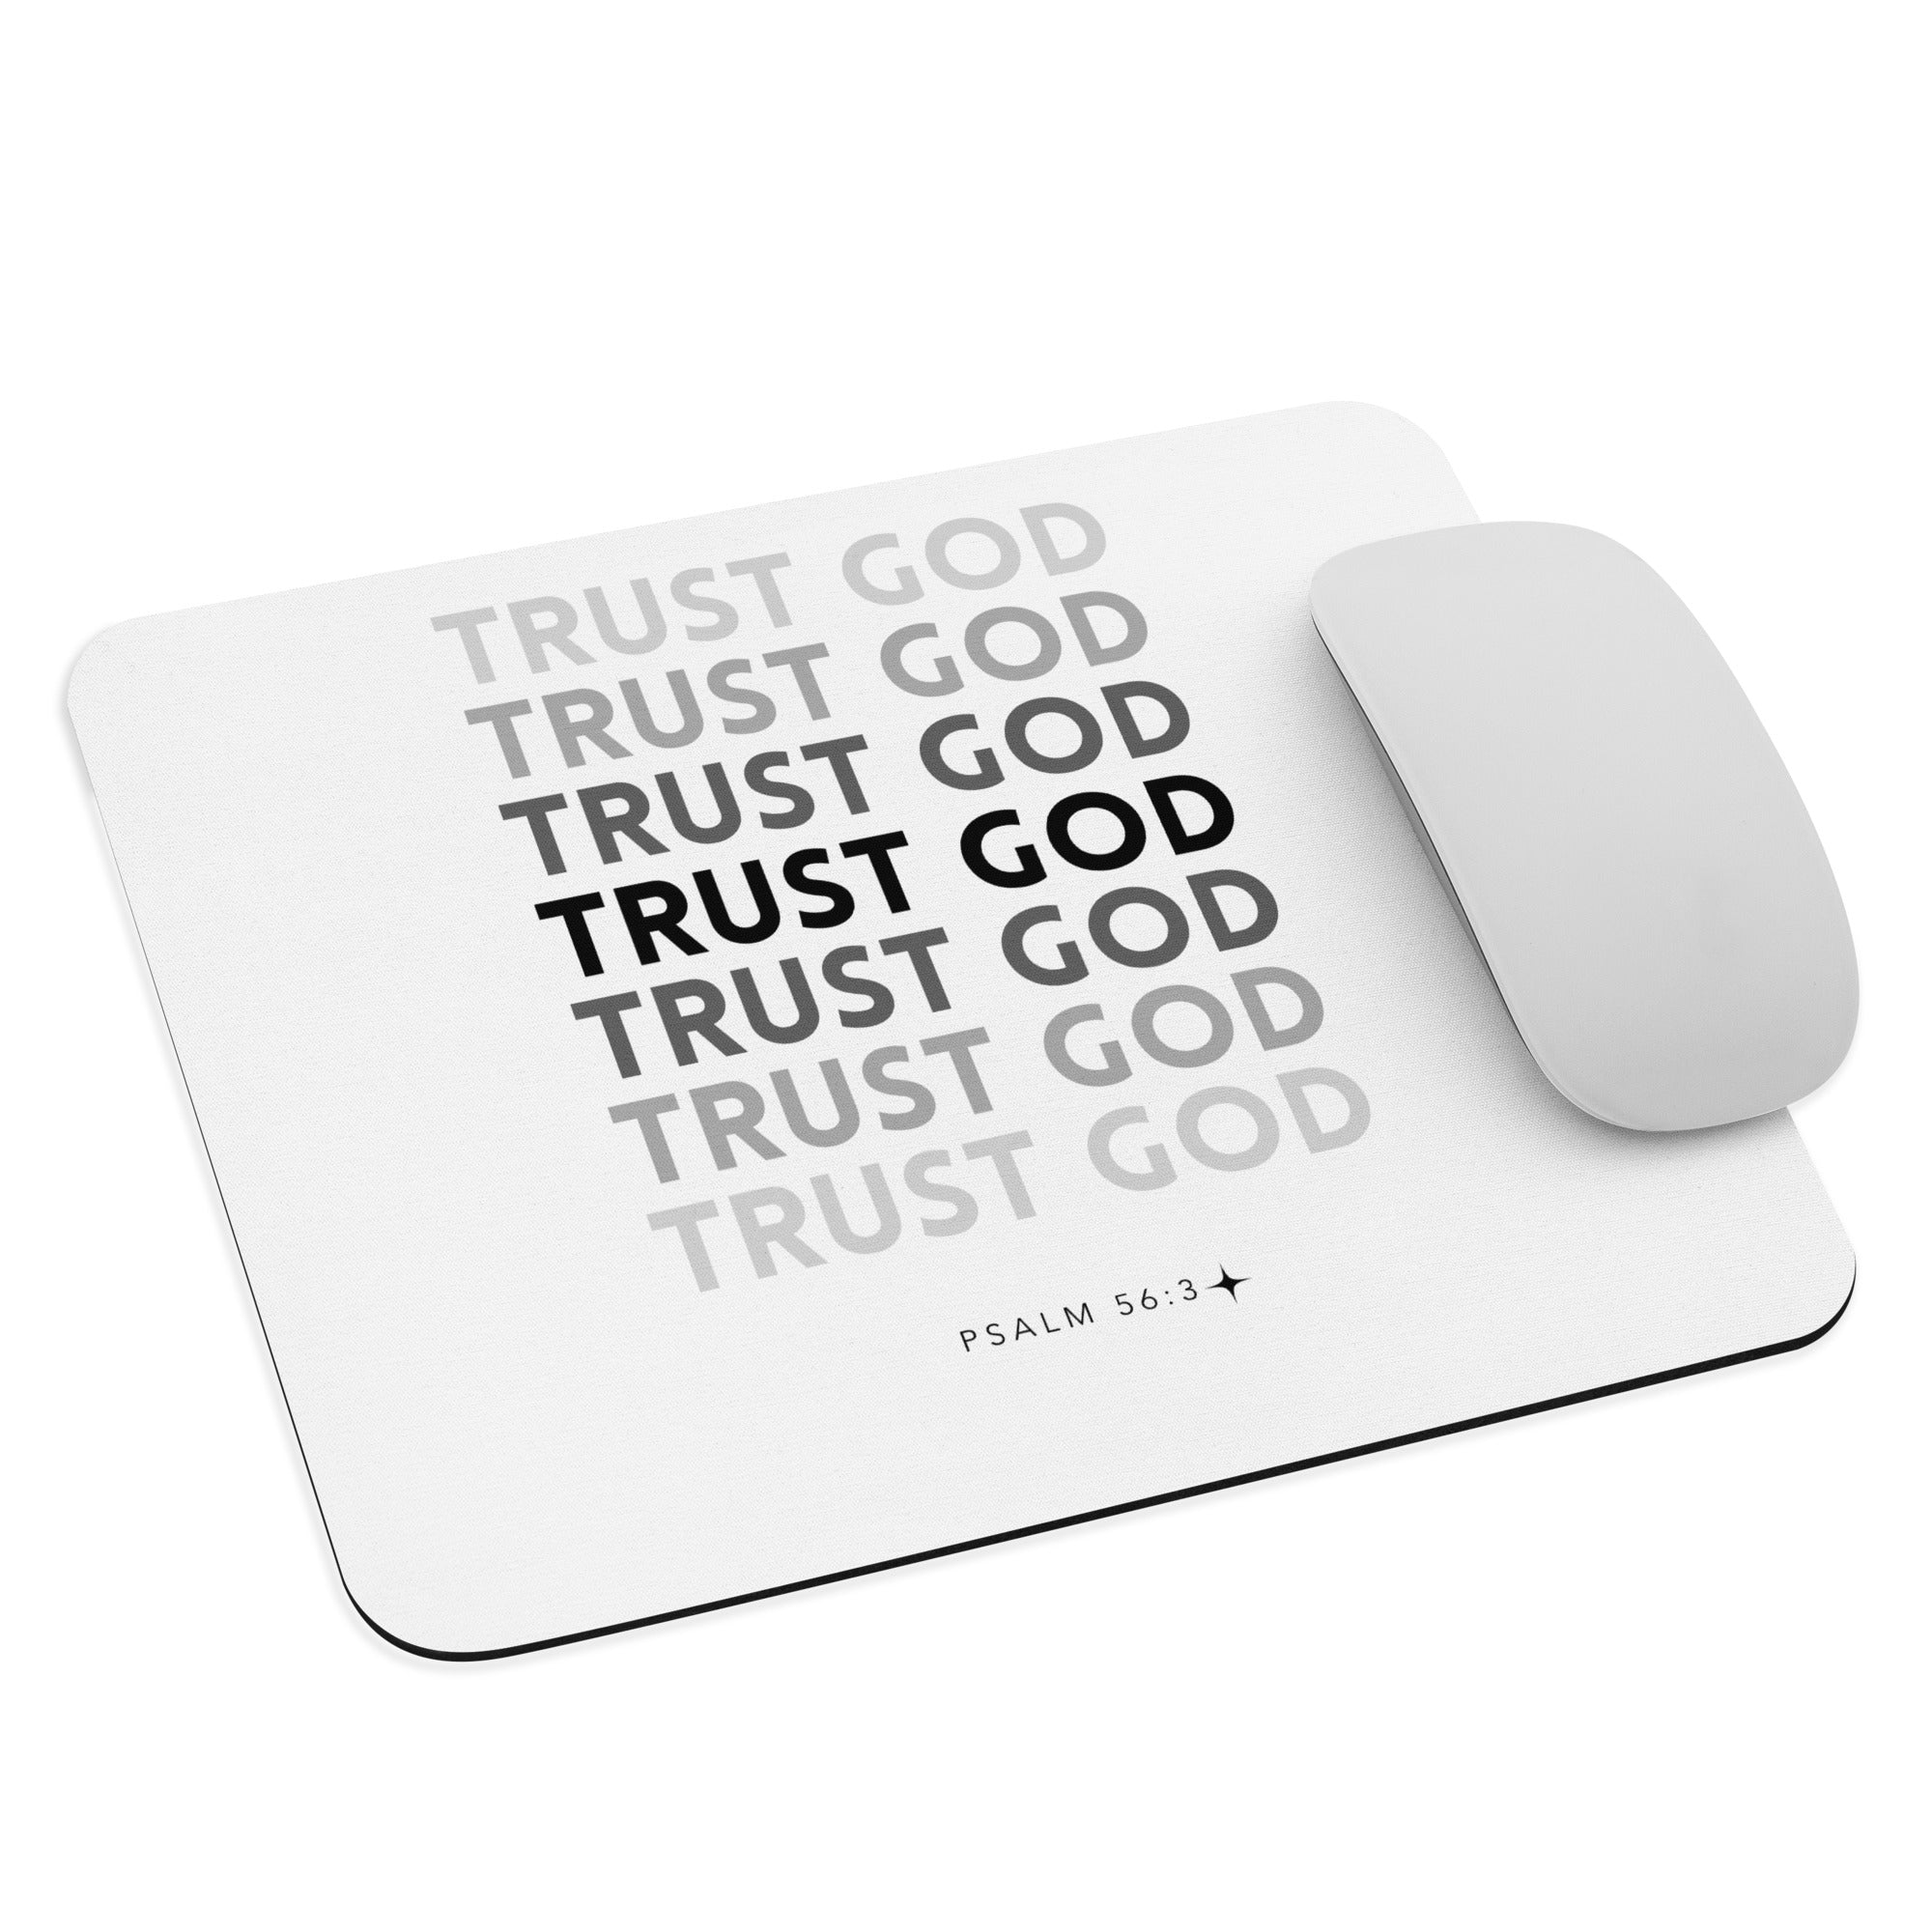 Mouse pad - Psalm 56:3